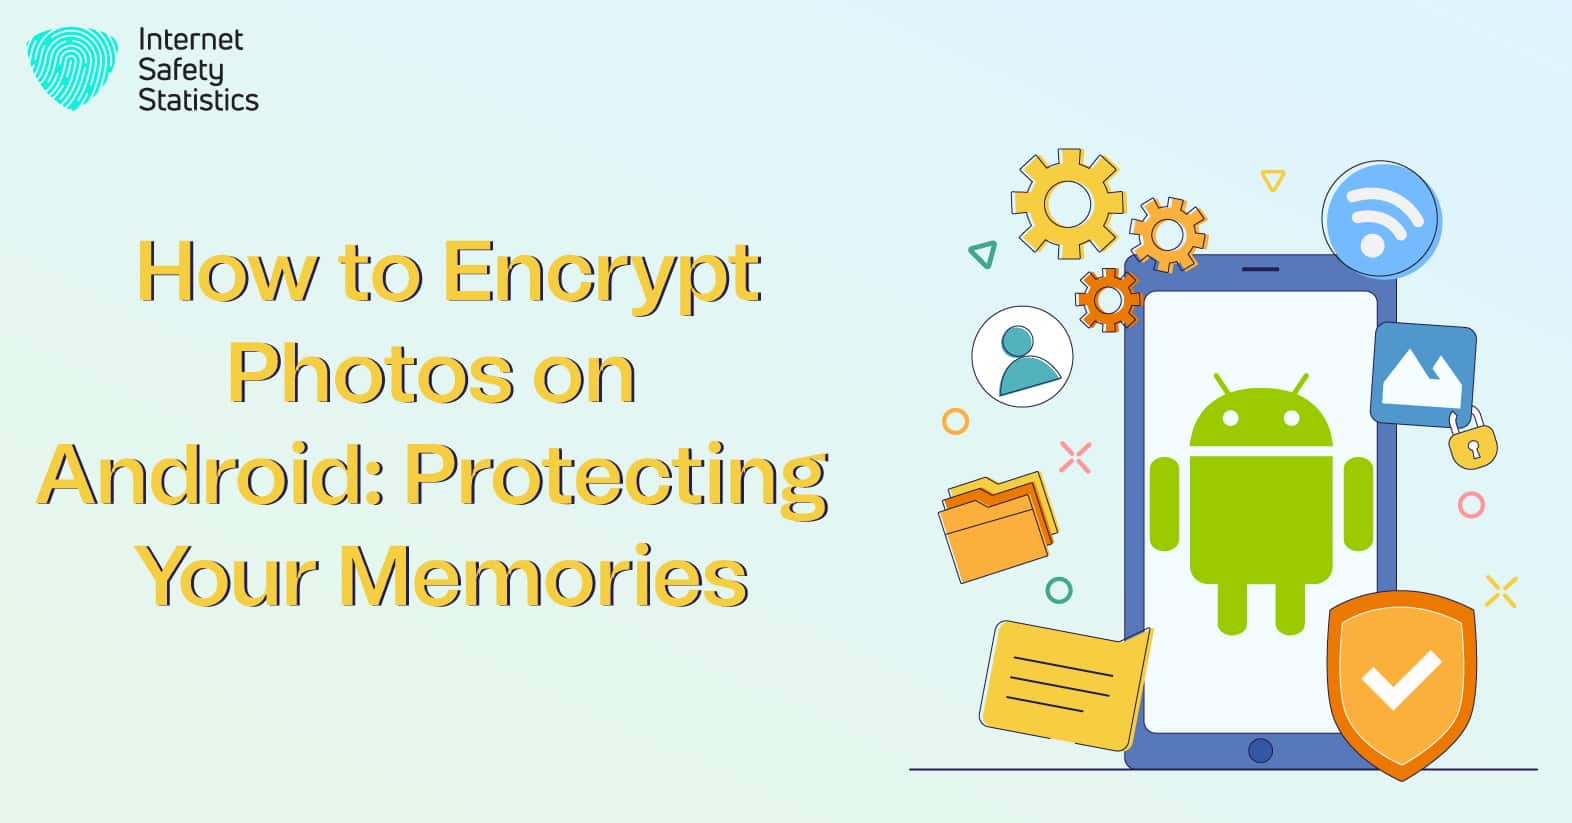 How to Encrypt Photos on Android: Protecting Your Memories